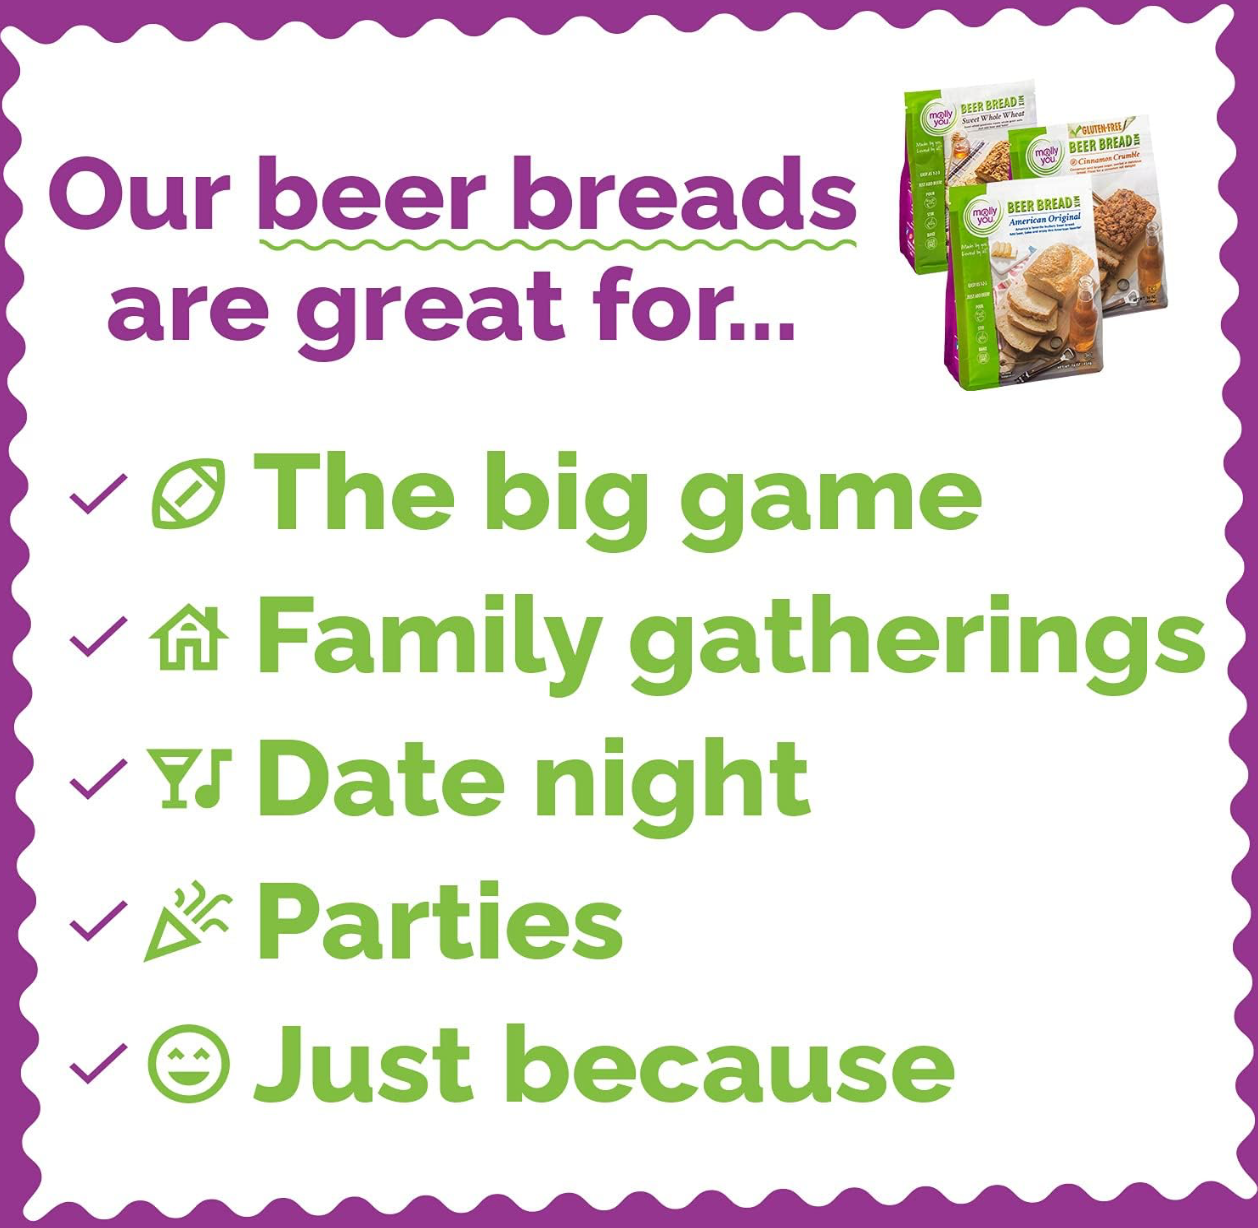 Beer Breads are great for, the big game, family gatherings, date night, parties, and just because! 